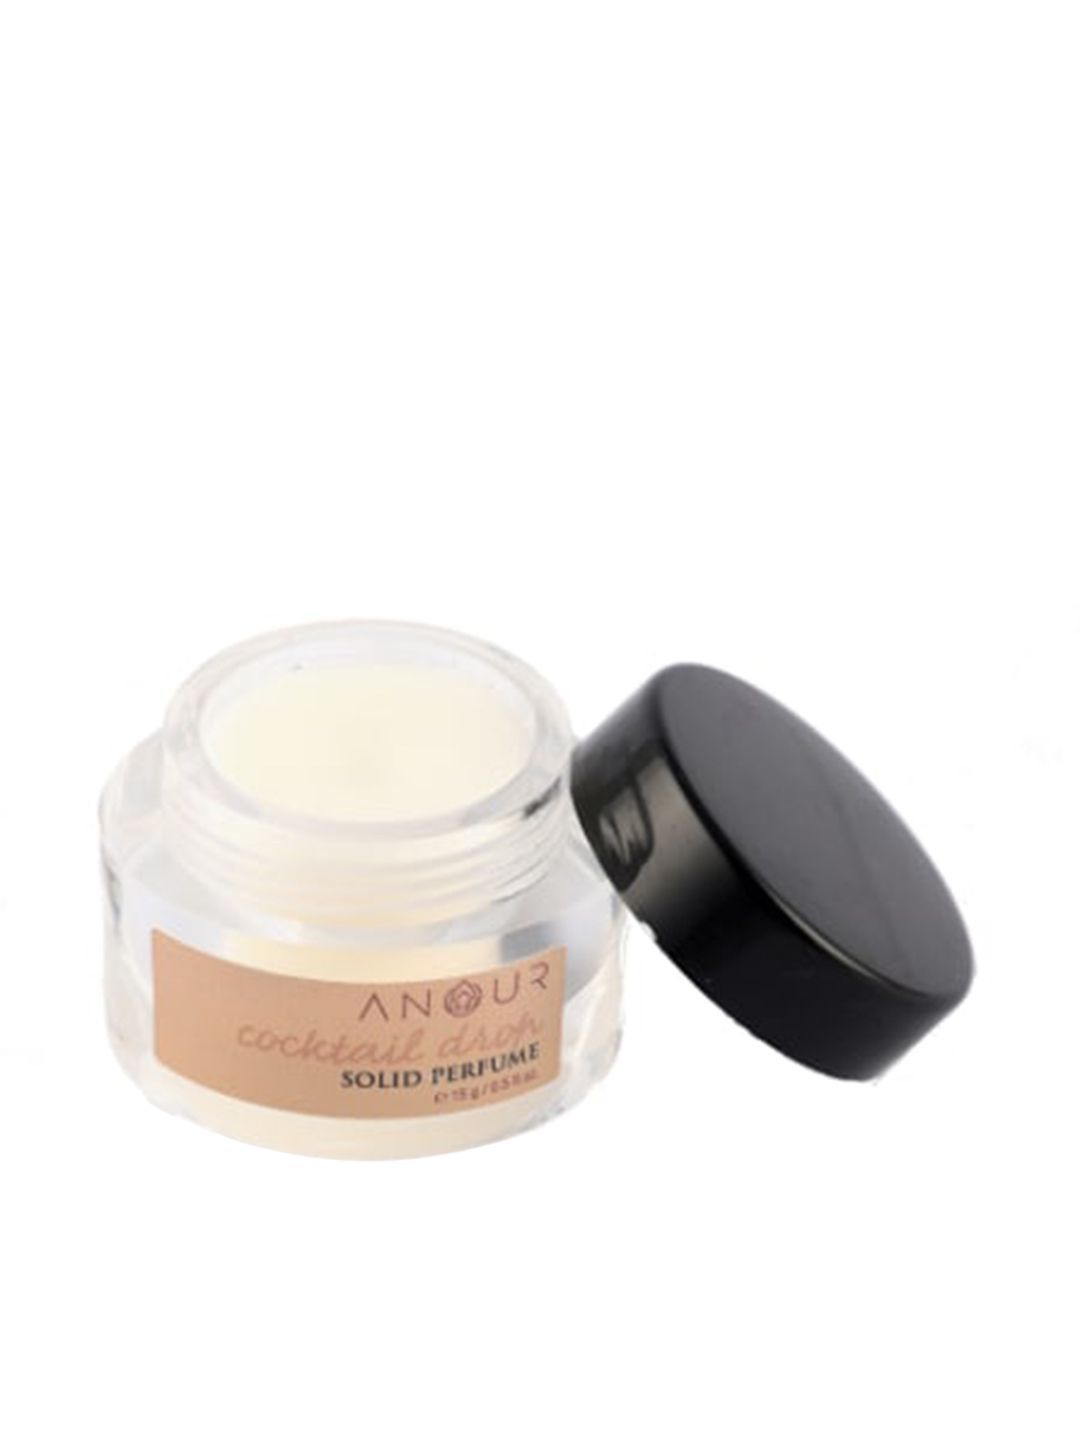 ANOUR Cocktail Drop Solid Perfume 15gm Price in India